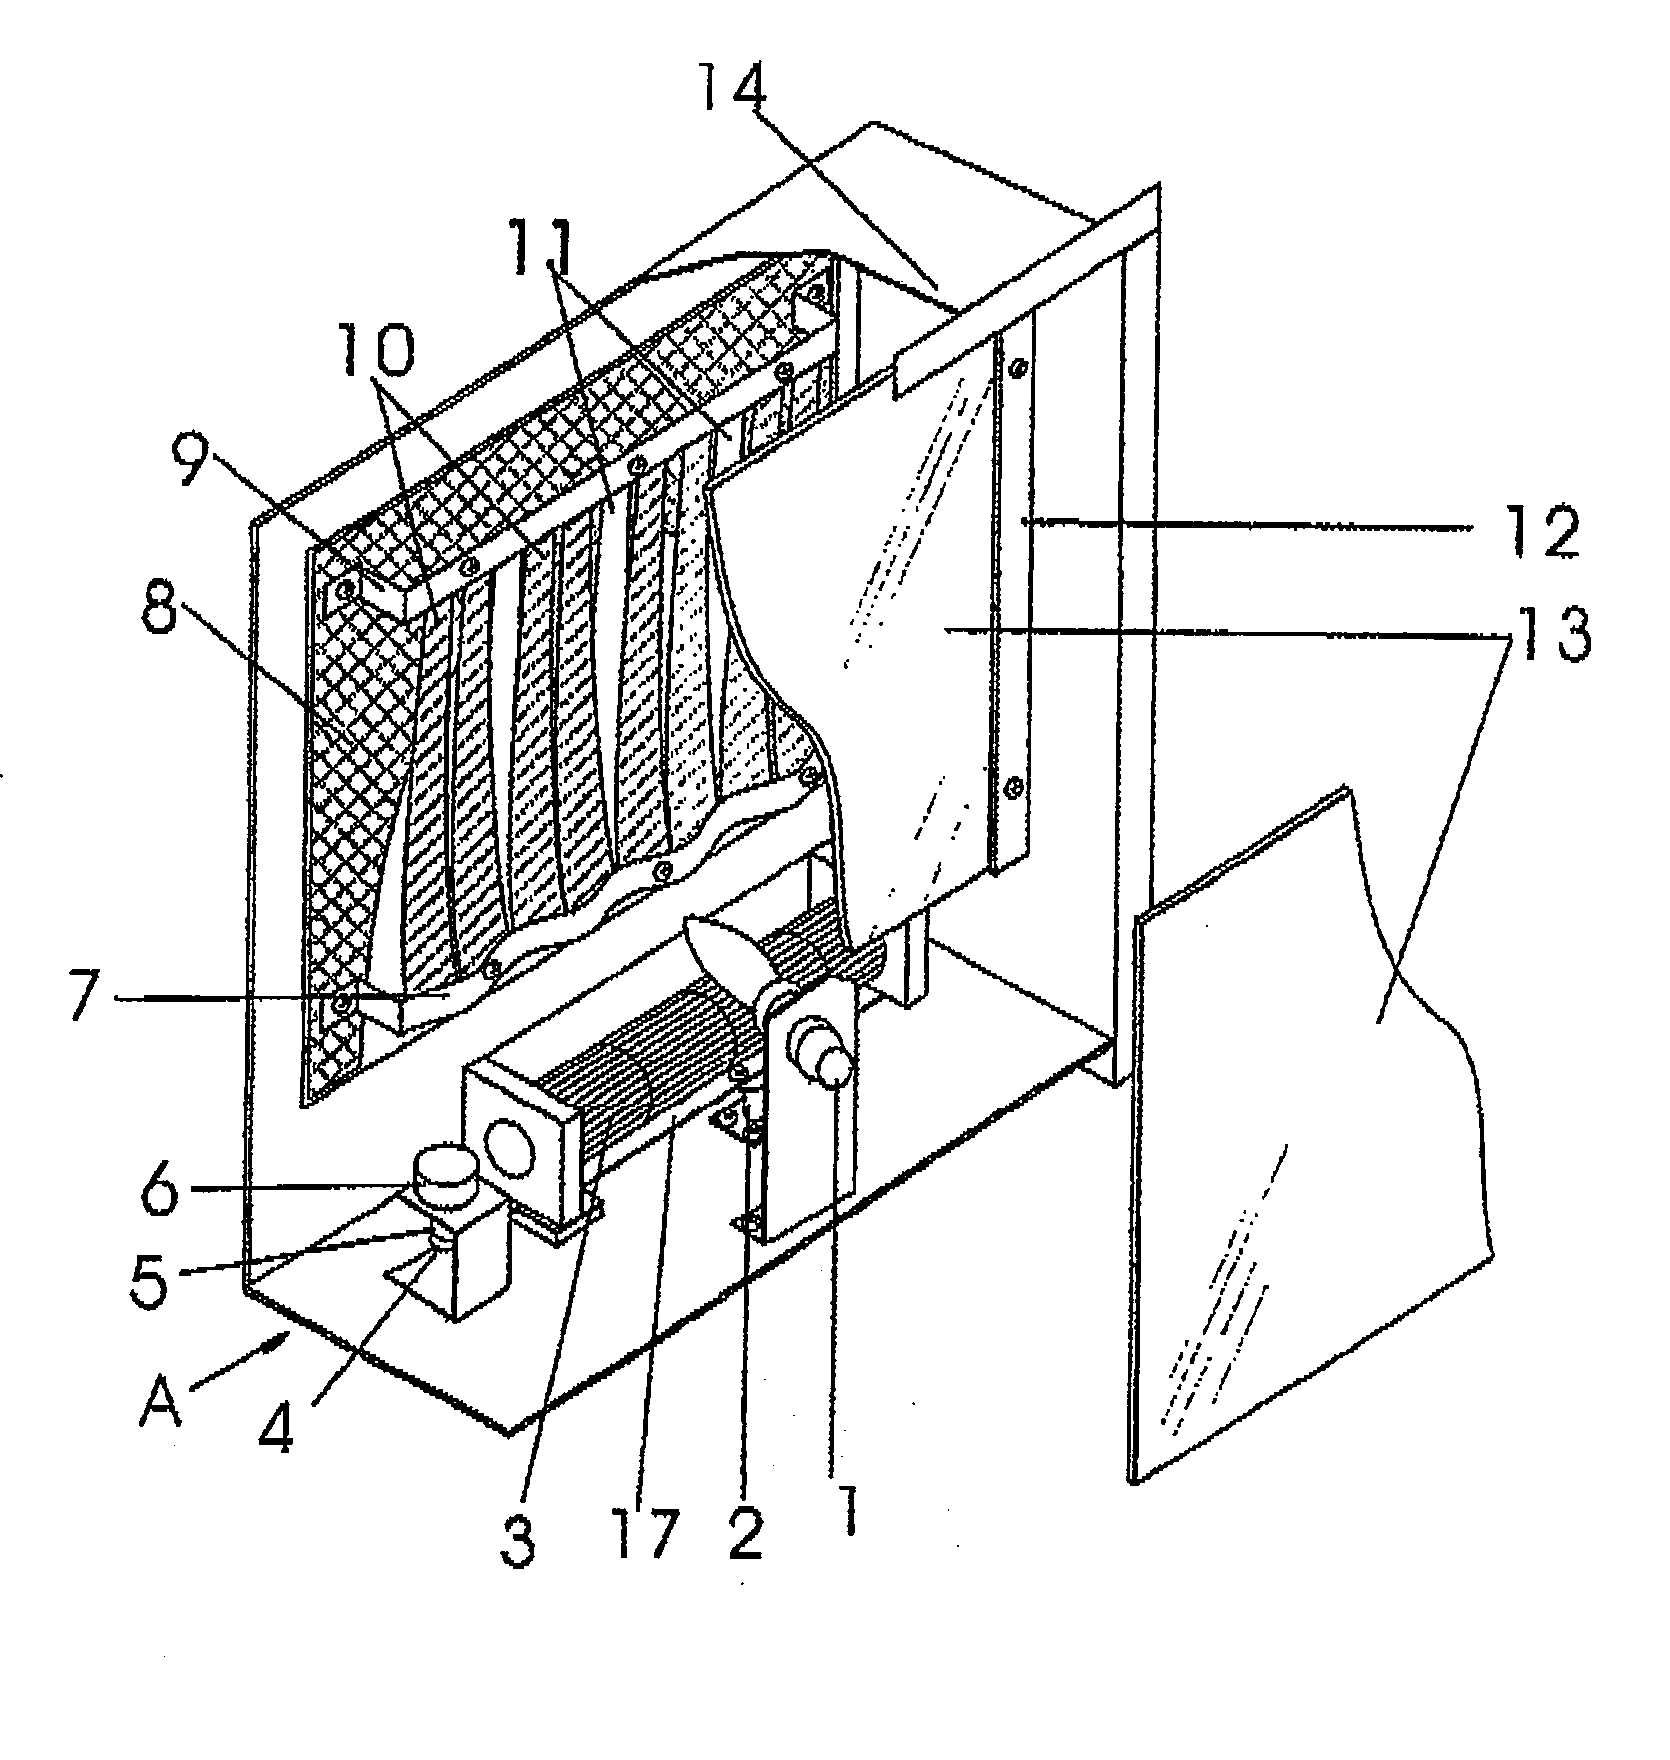 Flame Imitation Manufacturing Device of an Electrical-Heated Fireplace